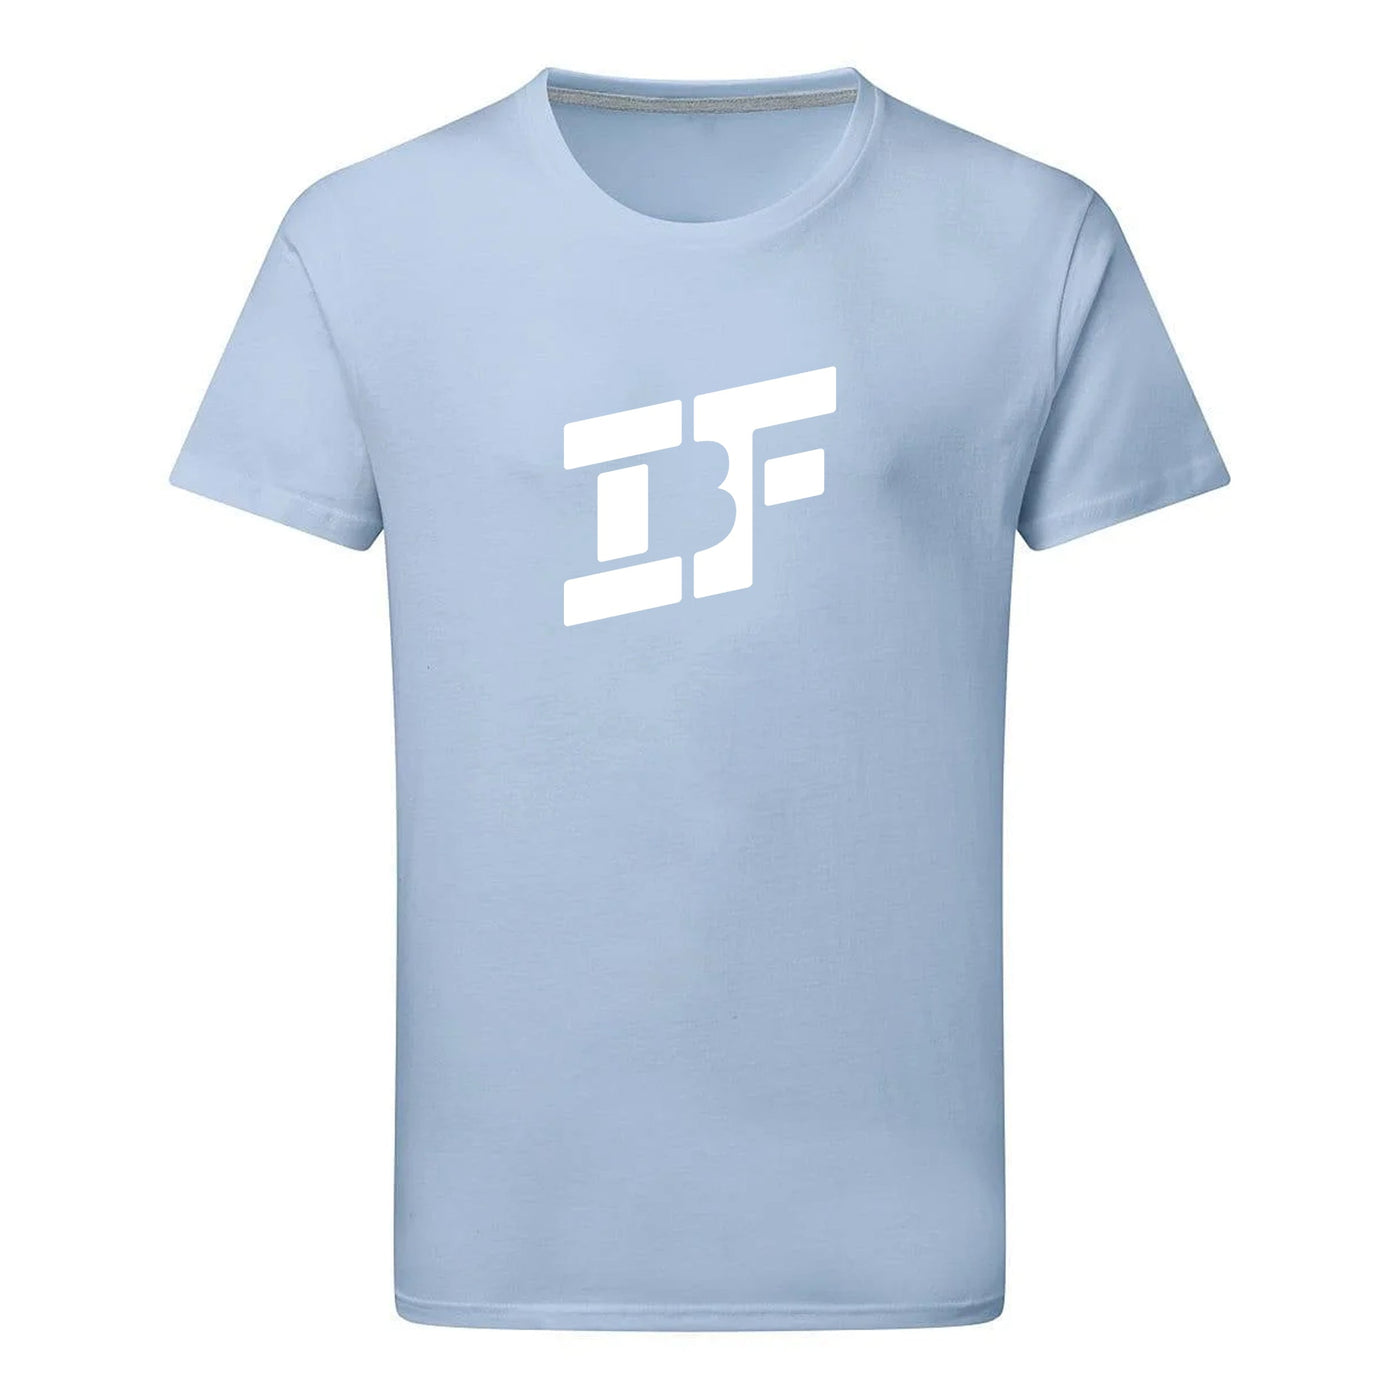 IBF Official Kids T-Shirt